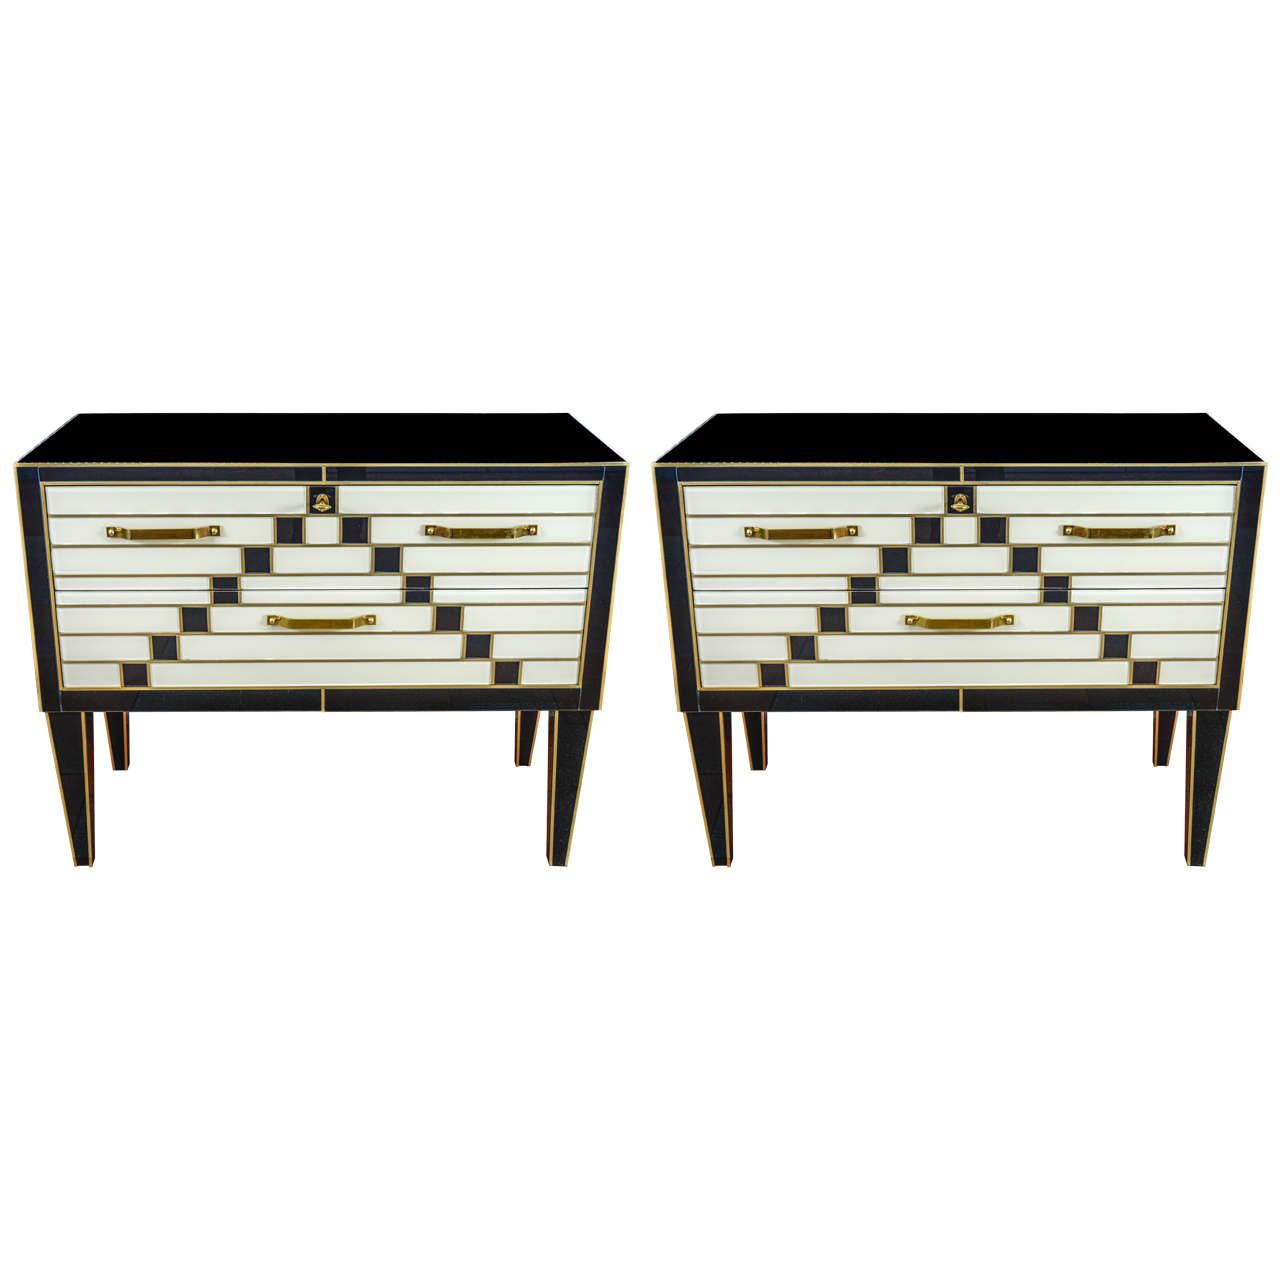 Pair of Commodes in Colored Glass